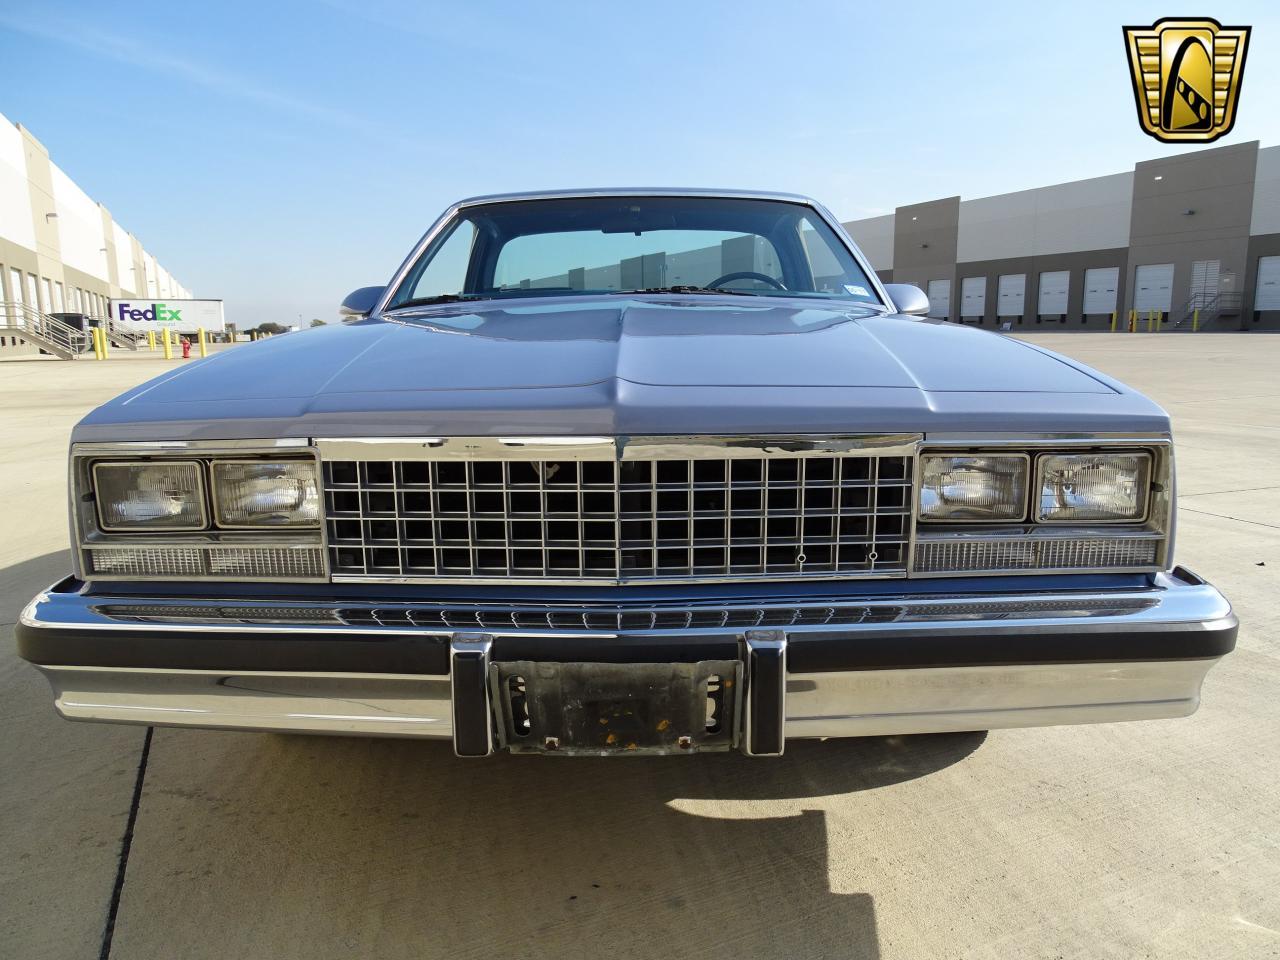 1986 gmc caballero for sale in dfw airport texas